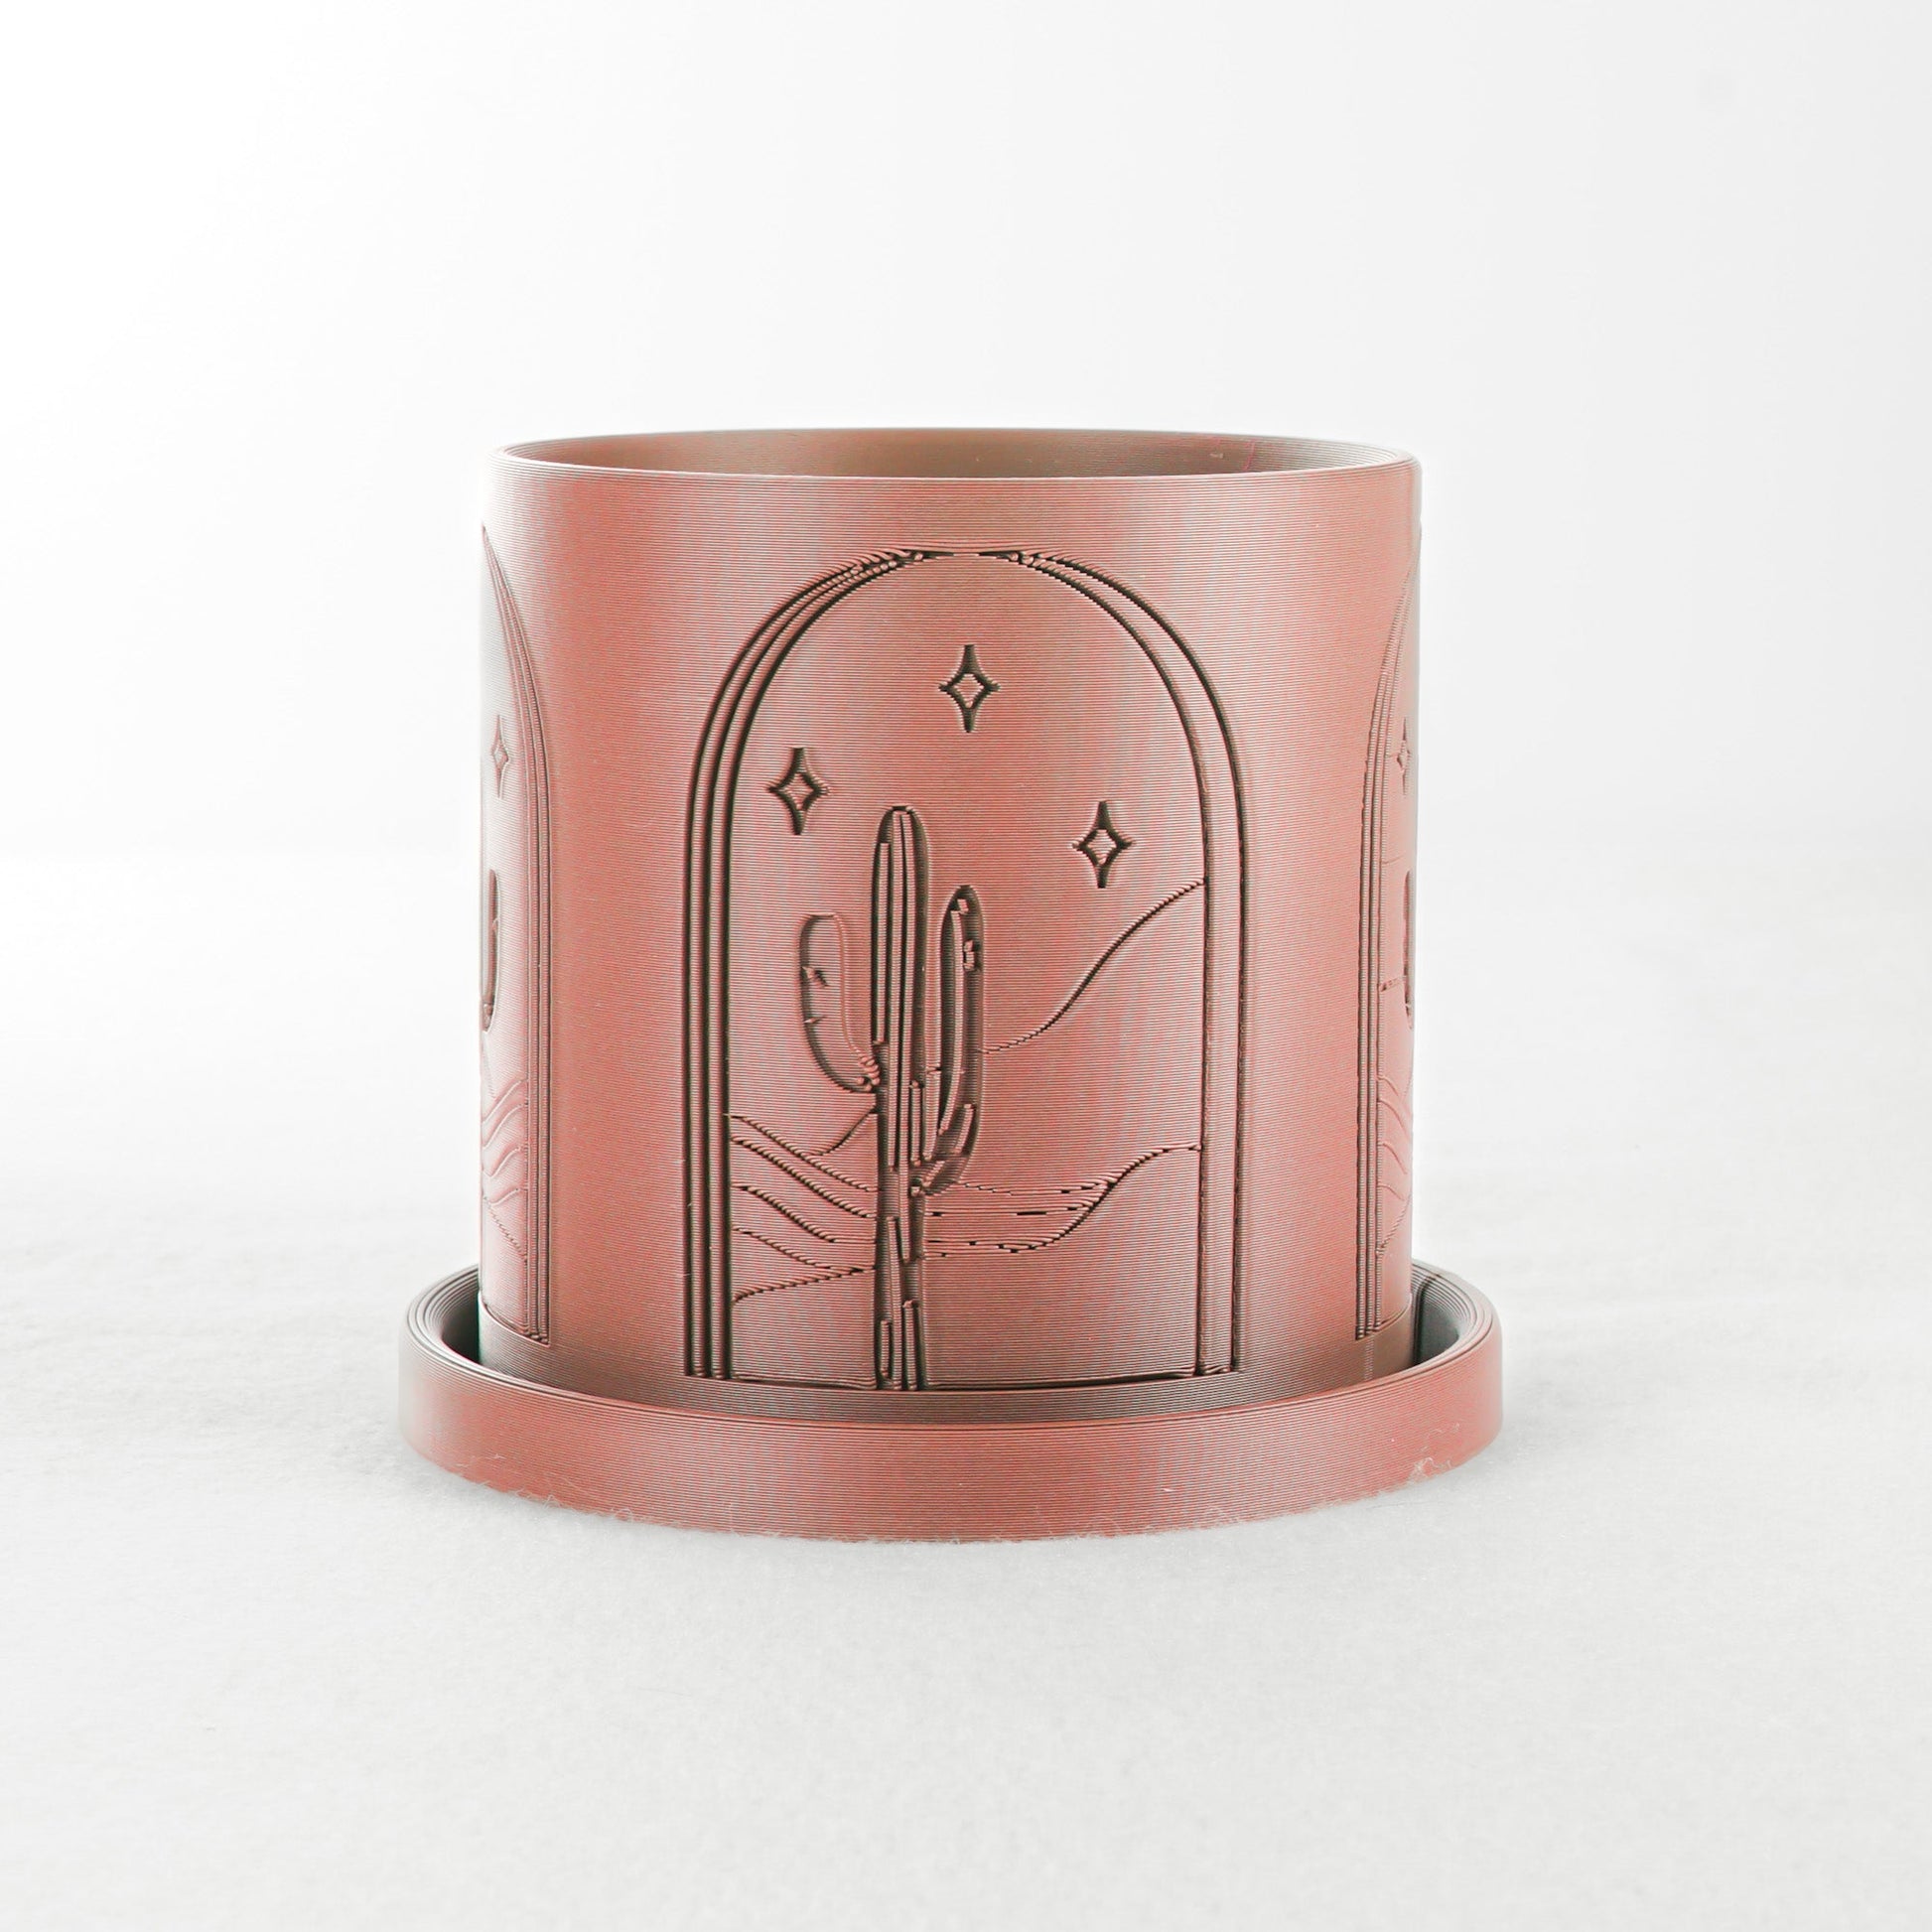 Cactus Planter - Rosebud HomeGoods Copper 4 Inch With Drip Tray MODERN HOME GOOD